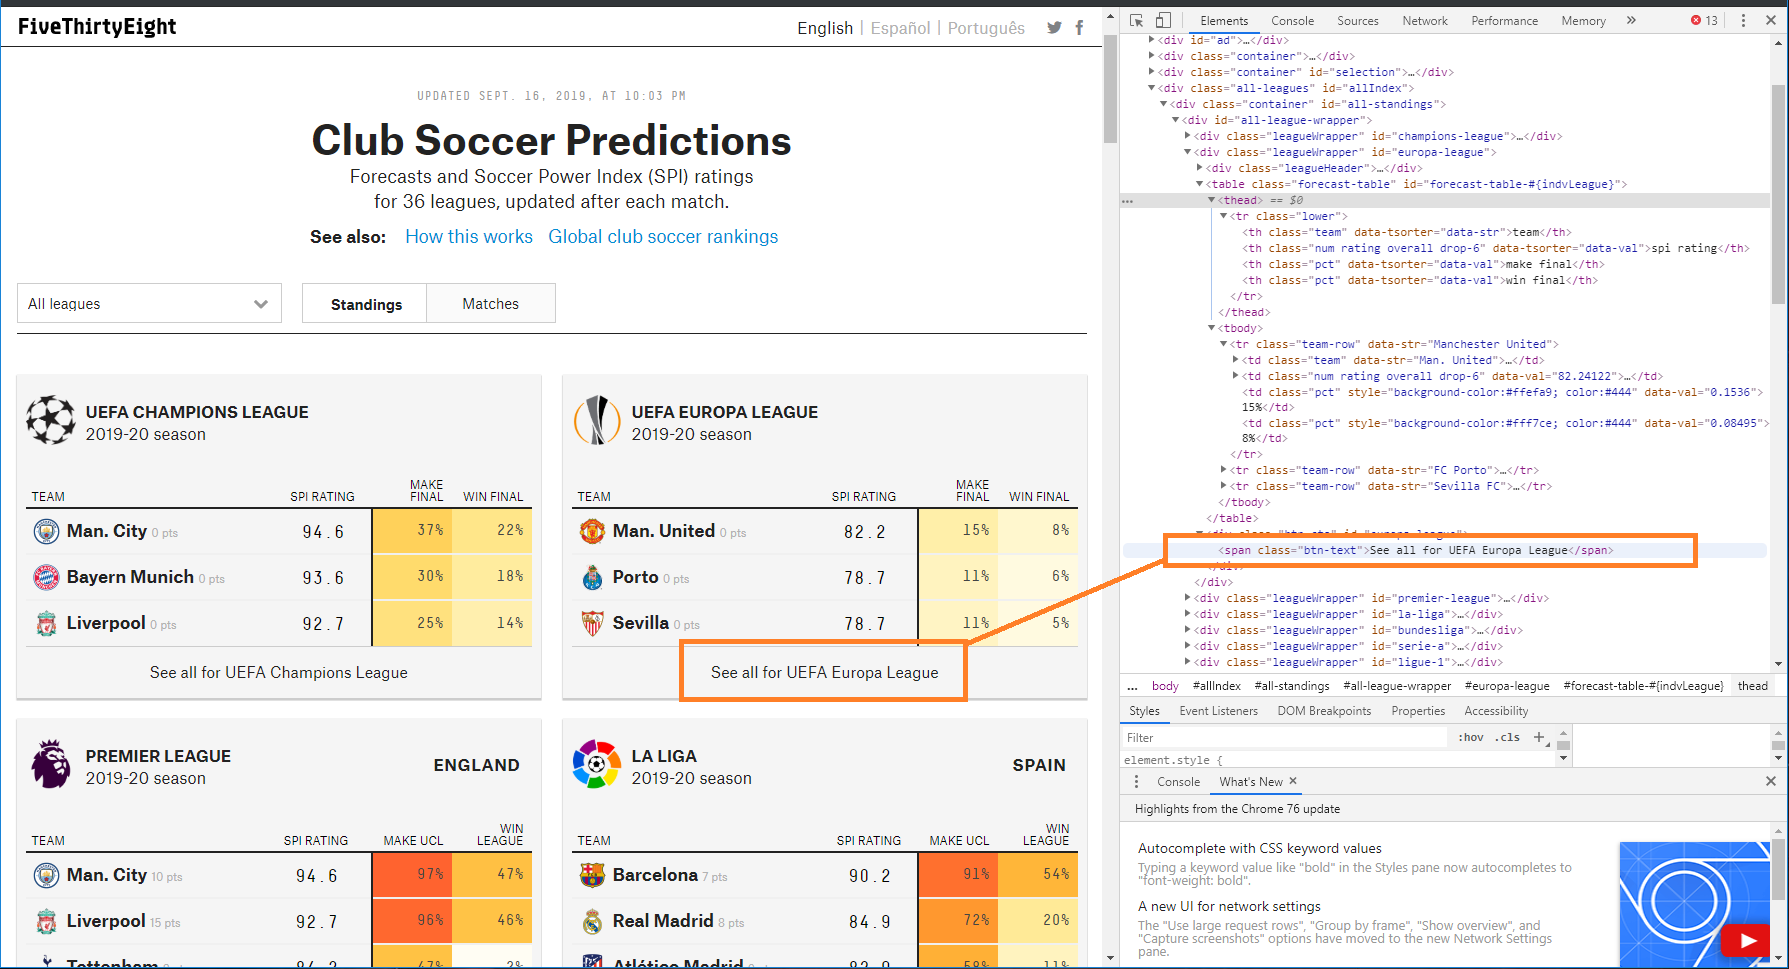 An image showing the code underlying FiveThirtyEight's football predictions page.